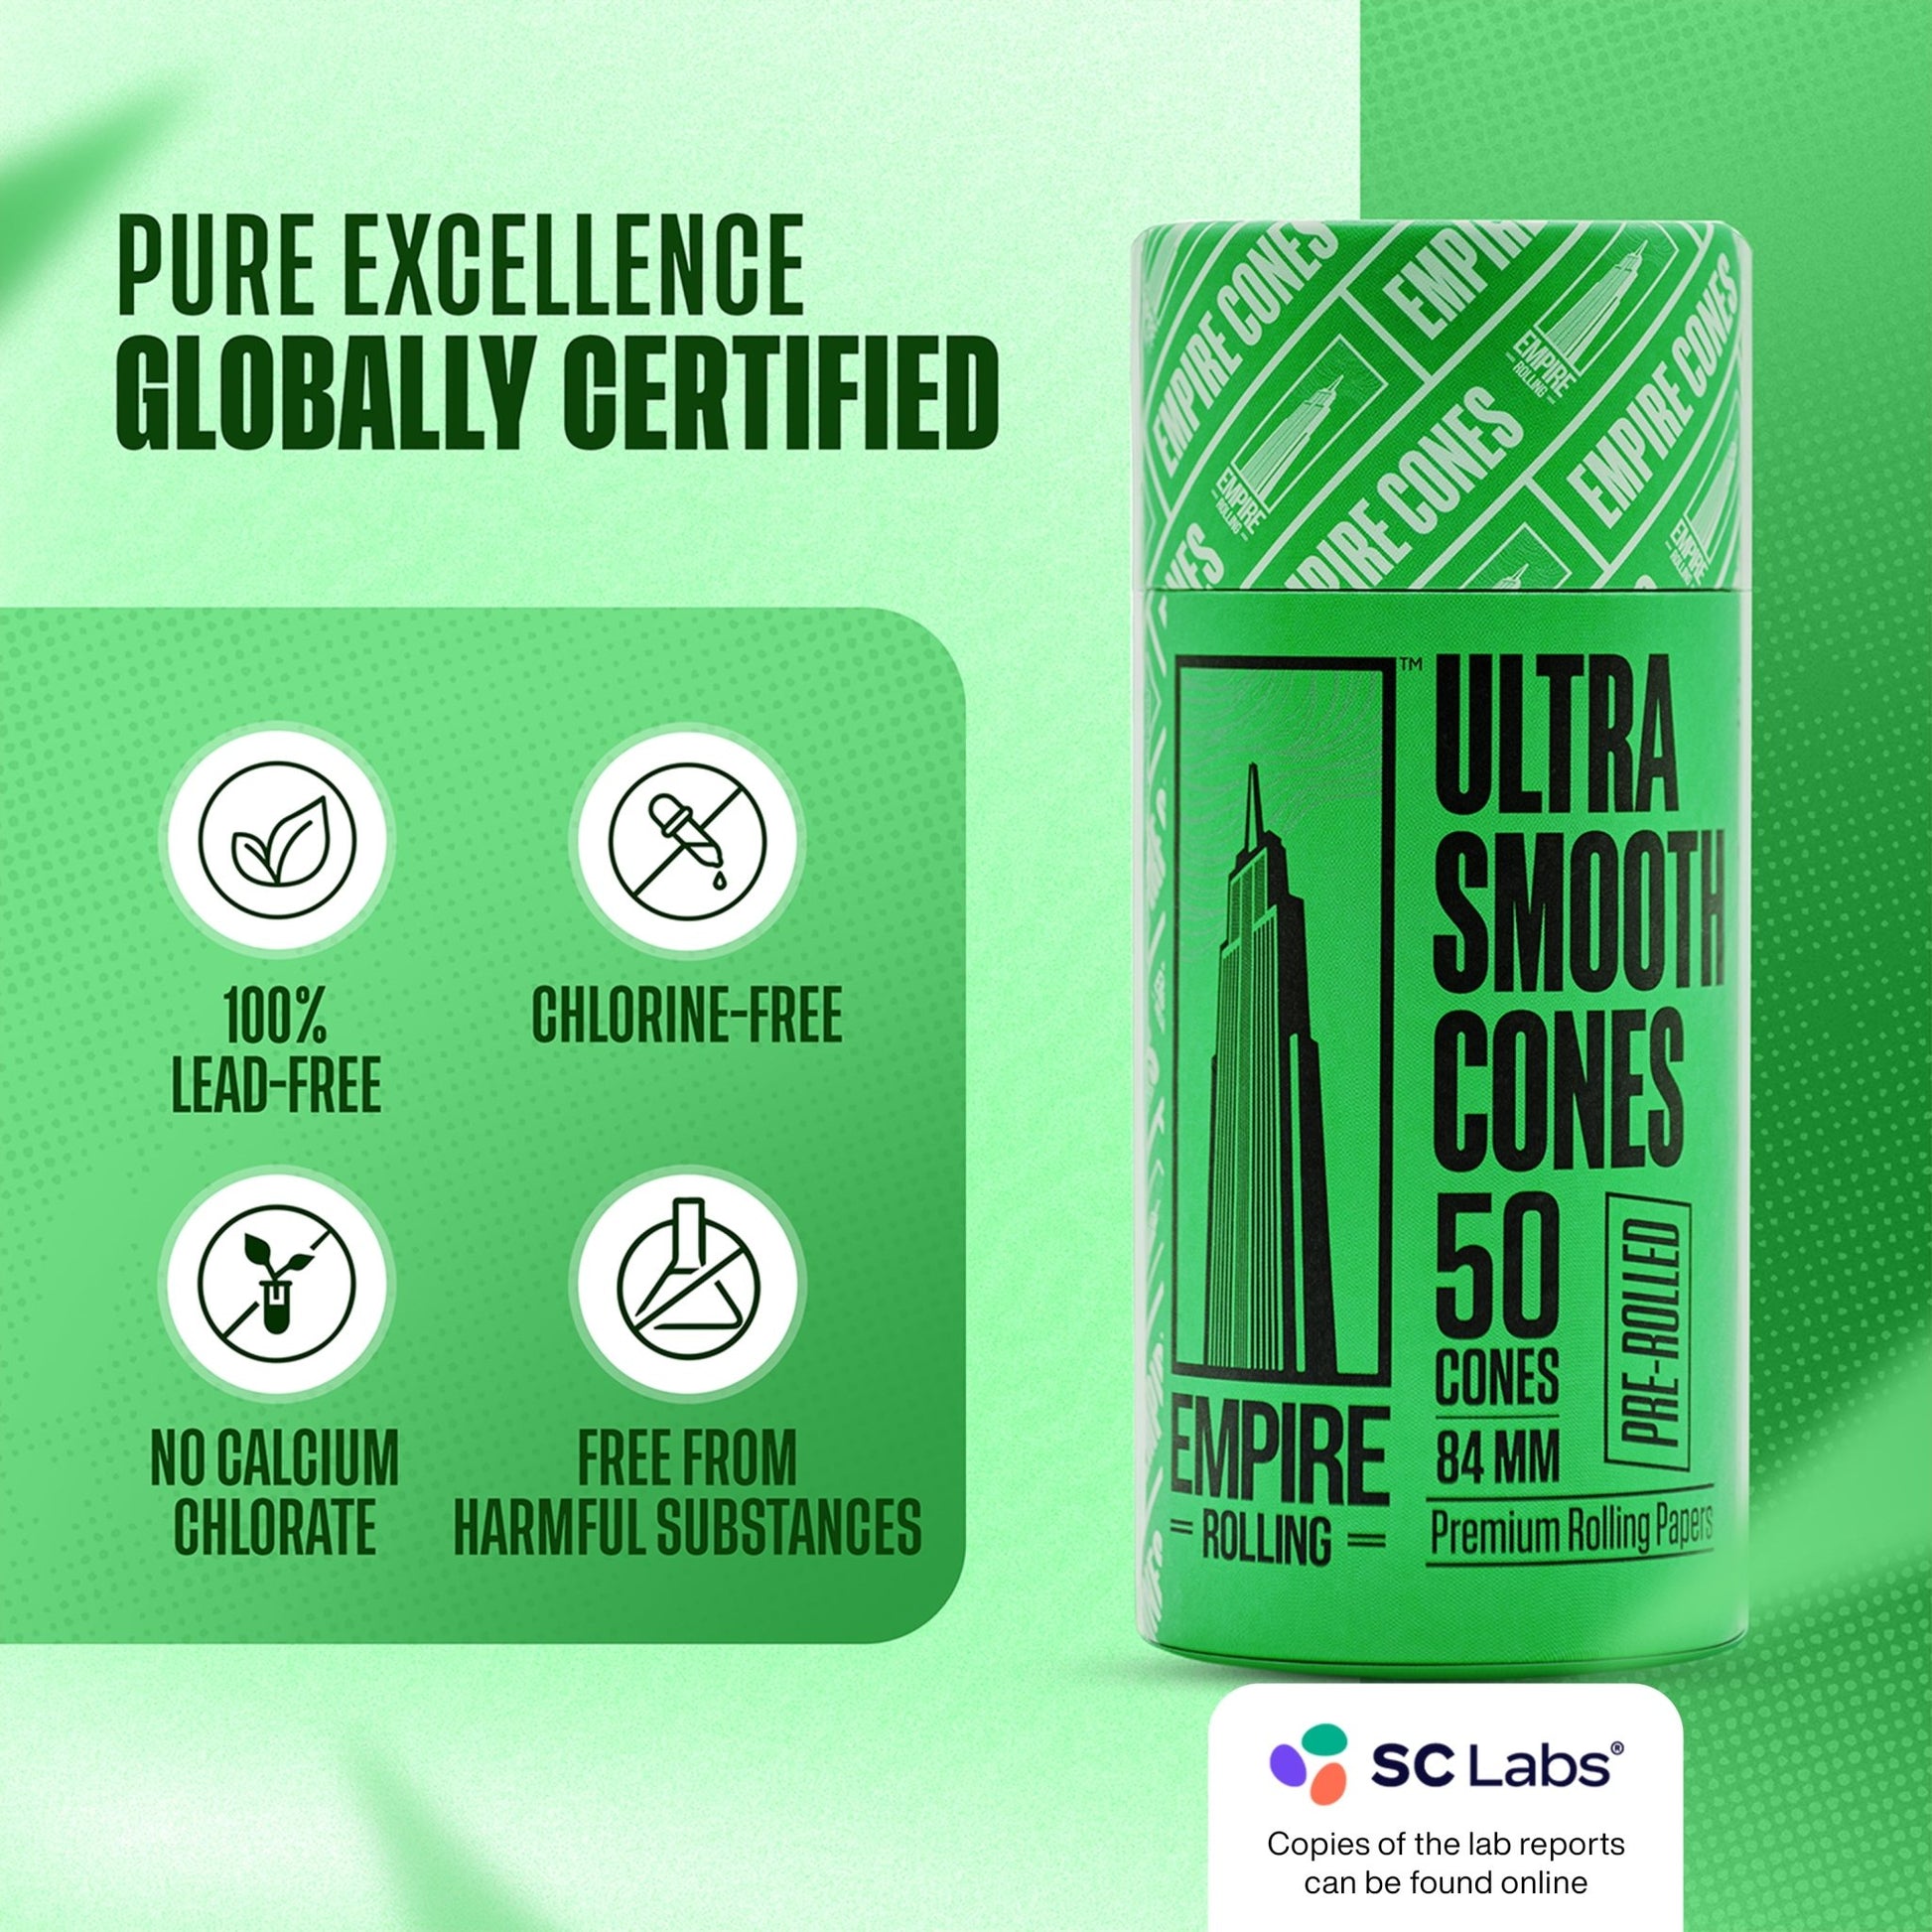 Empire Rolling's King Size Organic Hemp Rolling Papers, eco-friendly and crafted with high-quality, natural materials for a premium smoking experience.Ultra Smooth Green Cones 50 Count - Empire Rolling Papers